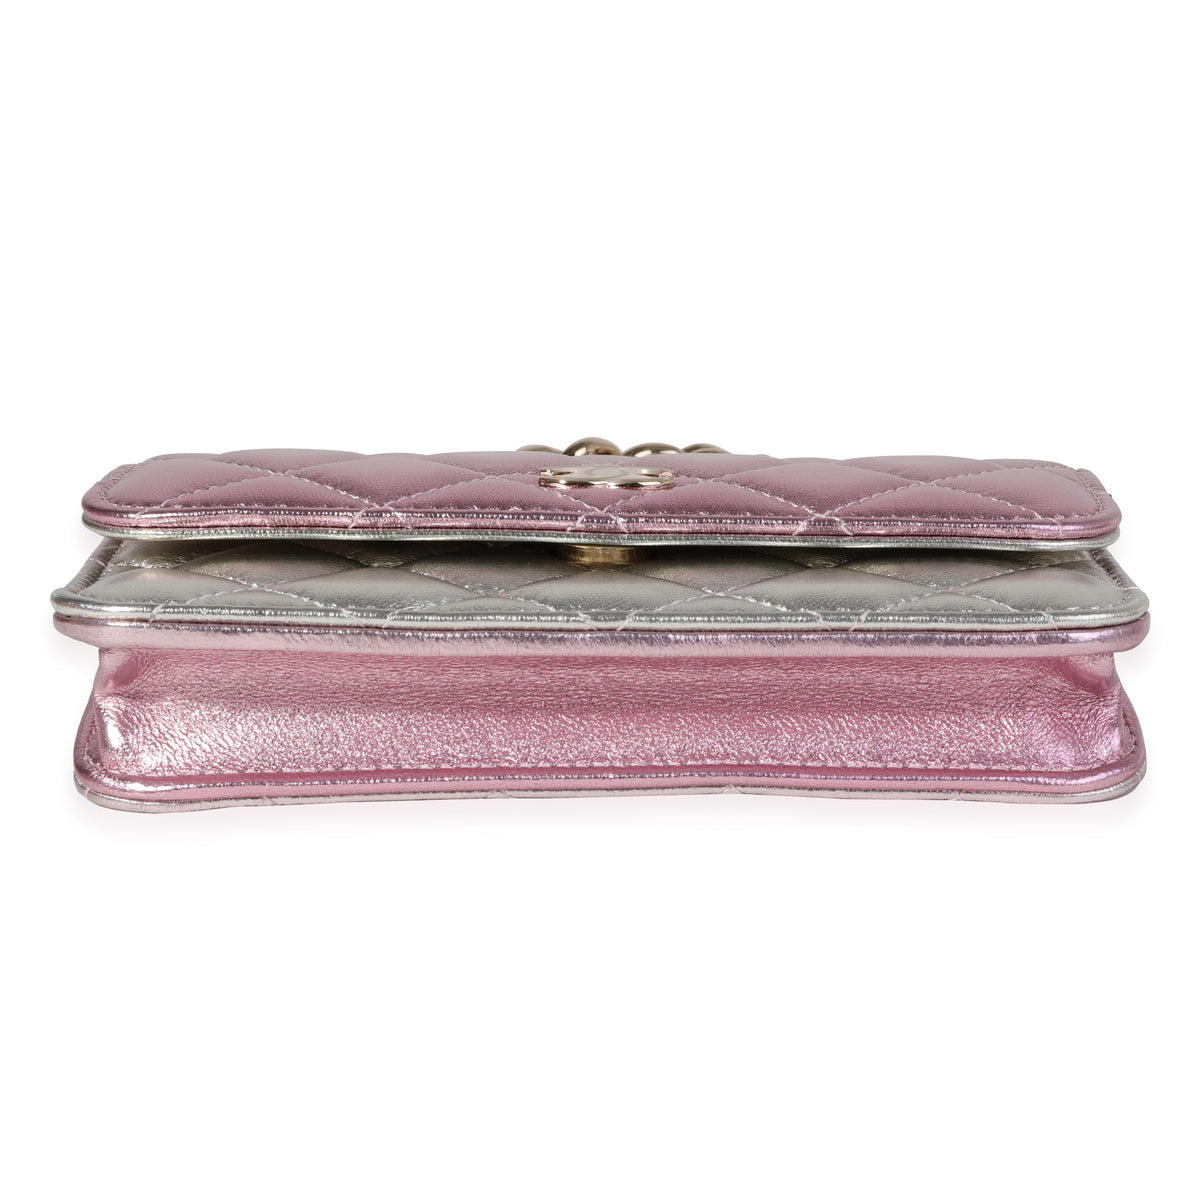 CHANEL, Bags, Chanel 9 Iridescent Clutch With Chain